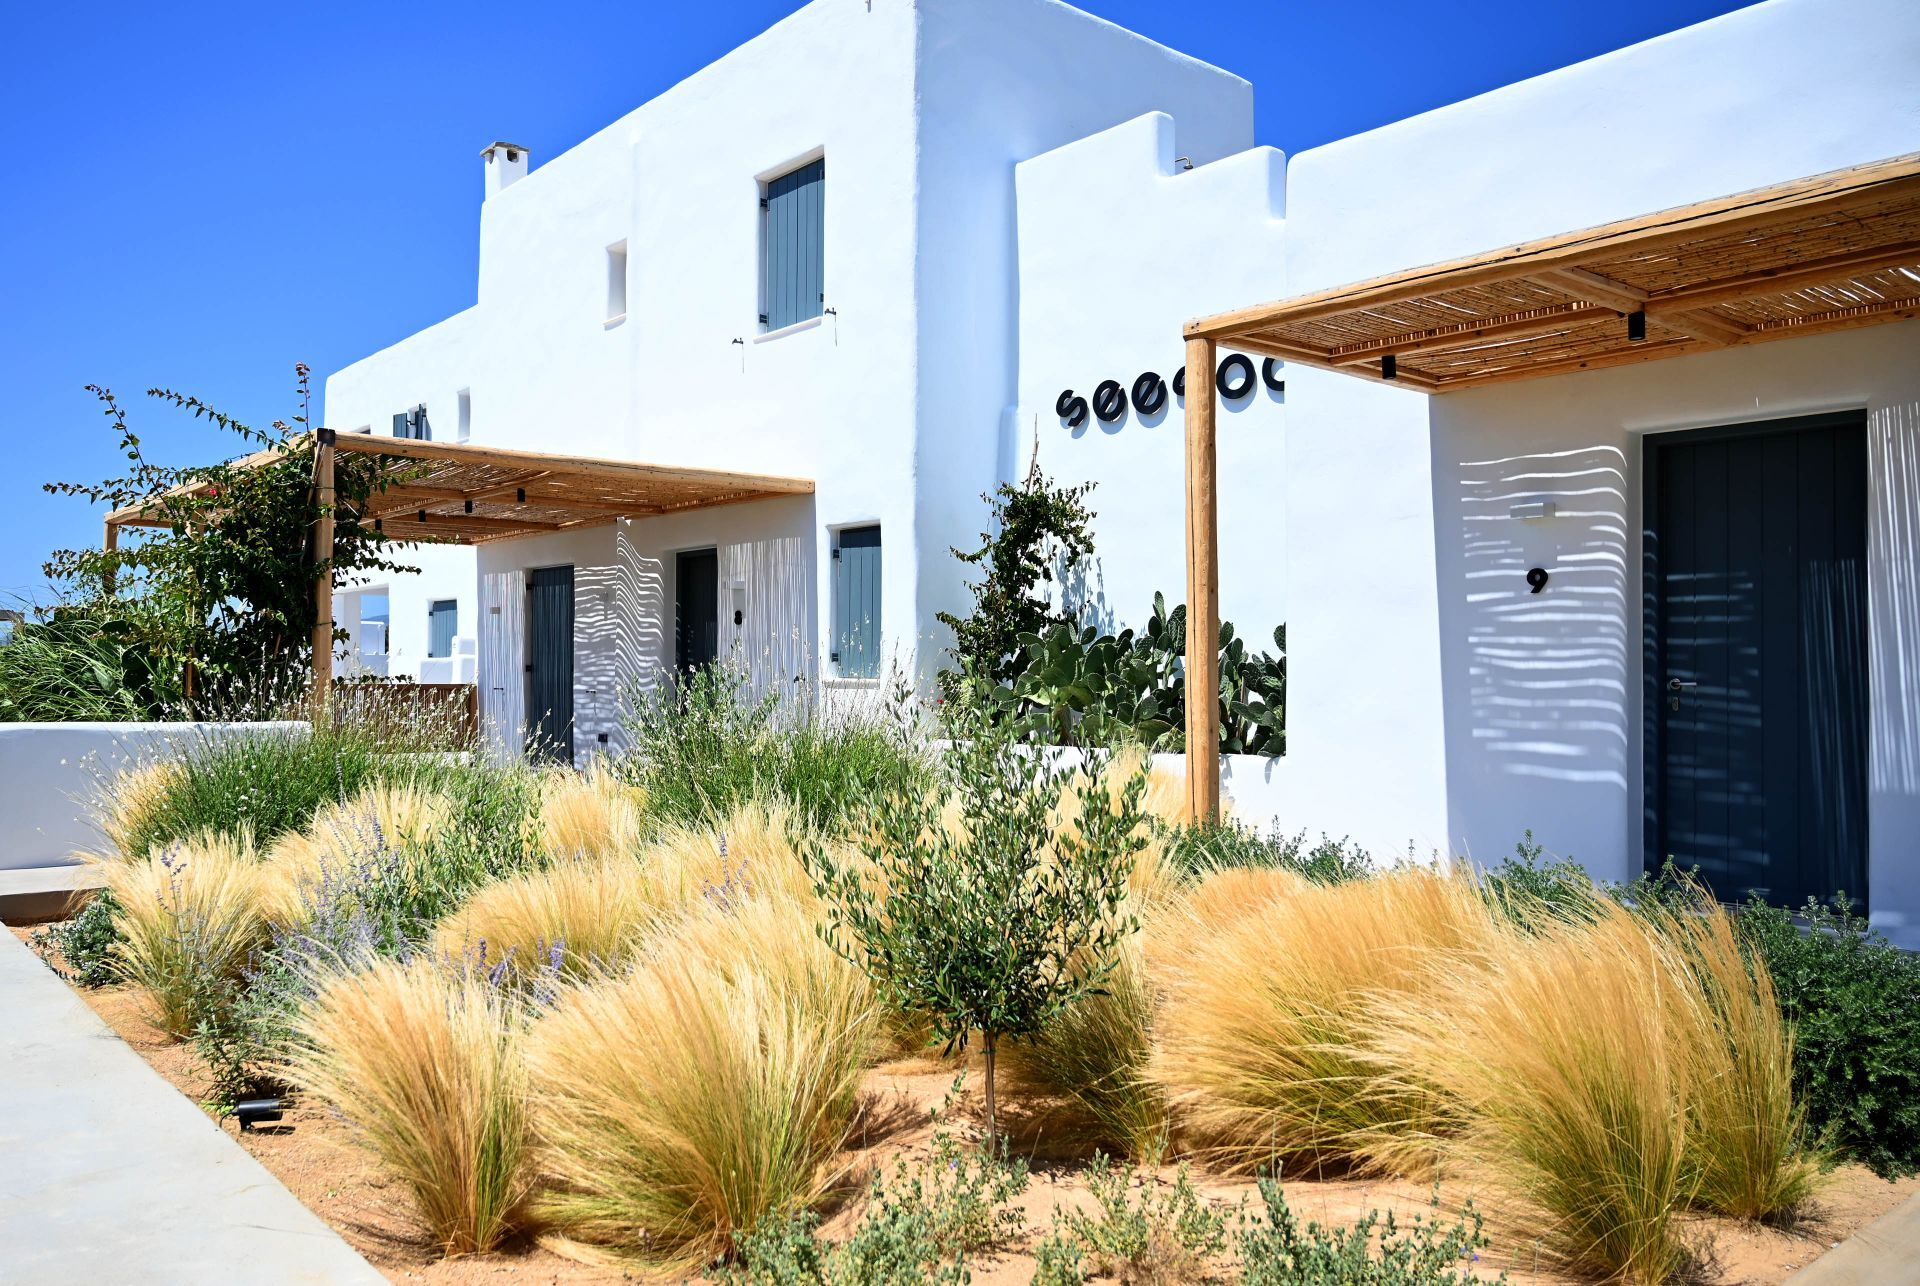 Seesou, one of the most popular hotels in Paros